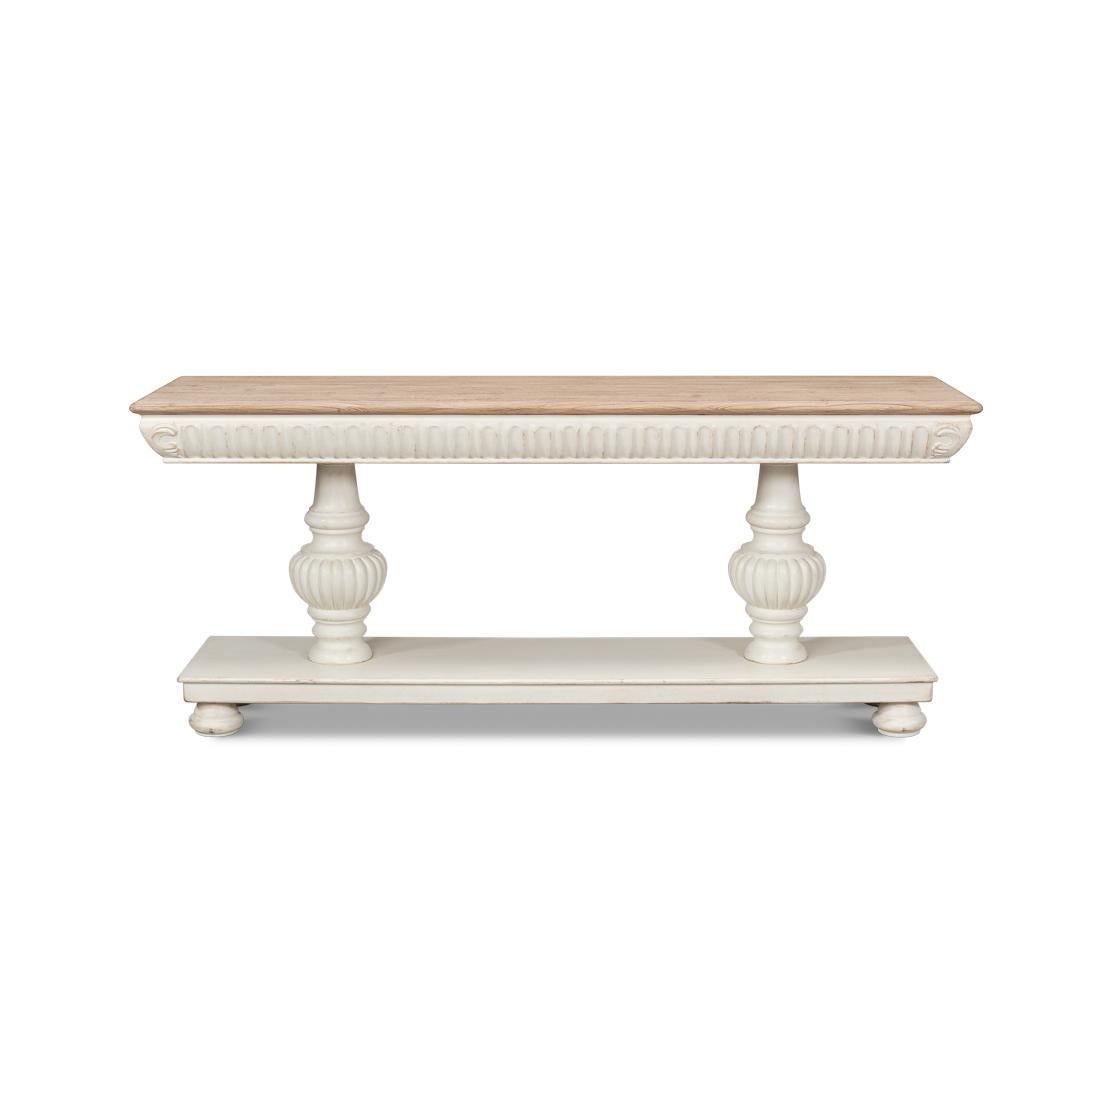 A dramatic transitional pine console, with a natural wooden top above an antiqued white painted base. It features carved volutes around the frieze, atop two carved baluster pedestals. This console table not only serves as a functional surface but